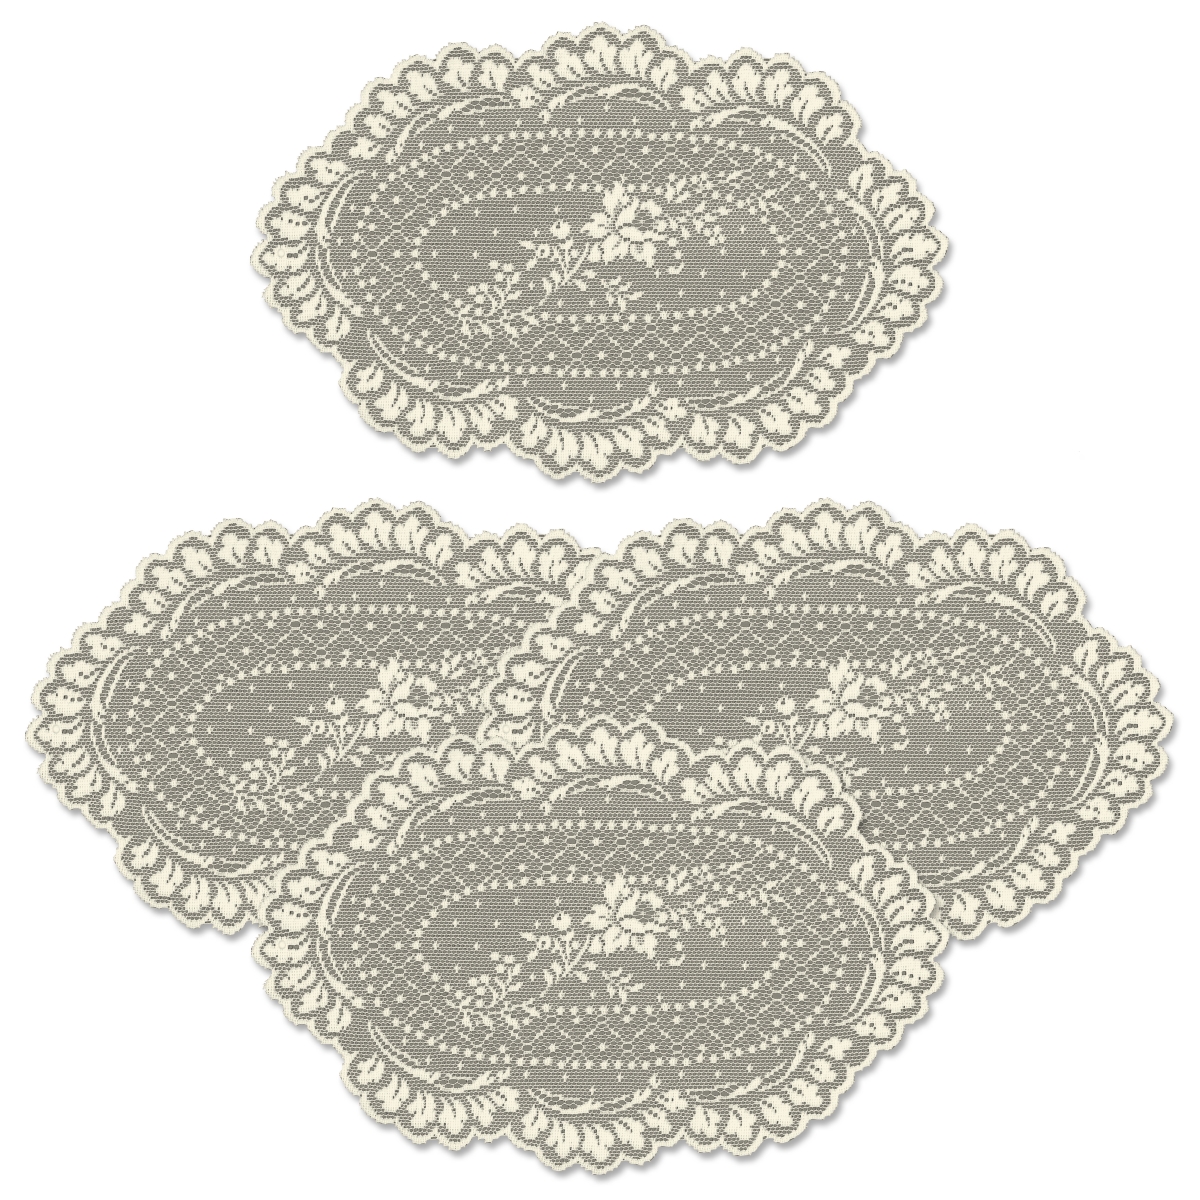 Picture of Heritage Lace FO-0812E-S 8 x 12 in. Floret Doily - Ecru - Set of 4